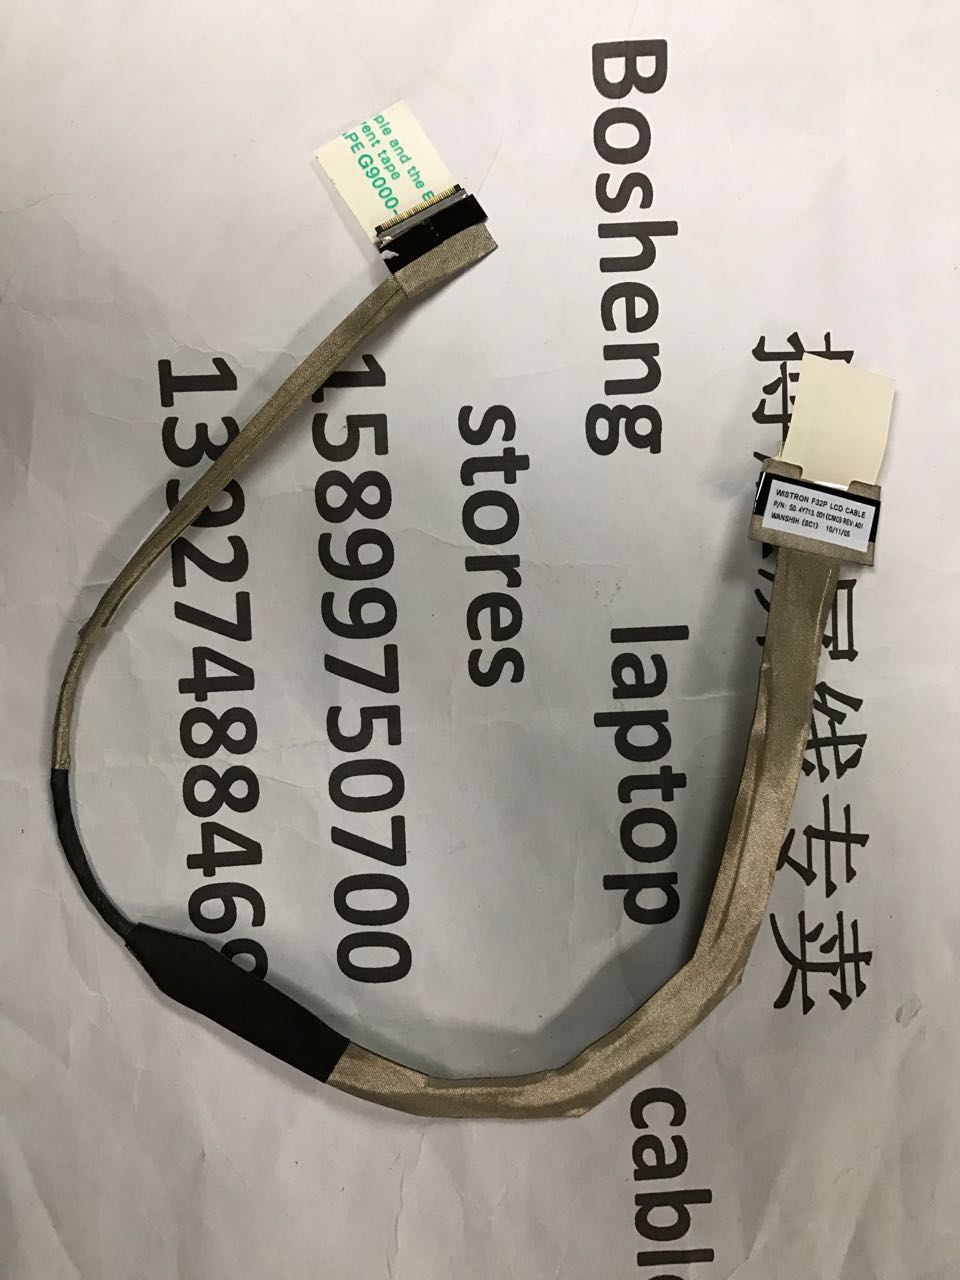 LENOVO U330 V350 V350G V350A 50.4Y713.001 LED LCD Screen LVDS VIDEO FLEX Ribbon Connector Cable